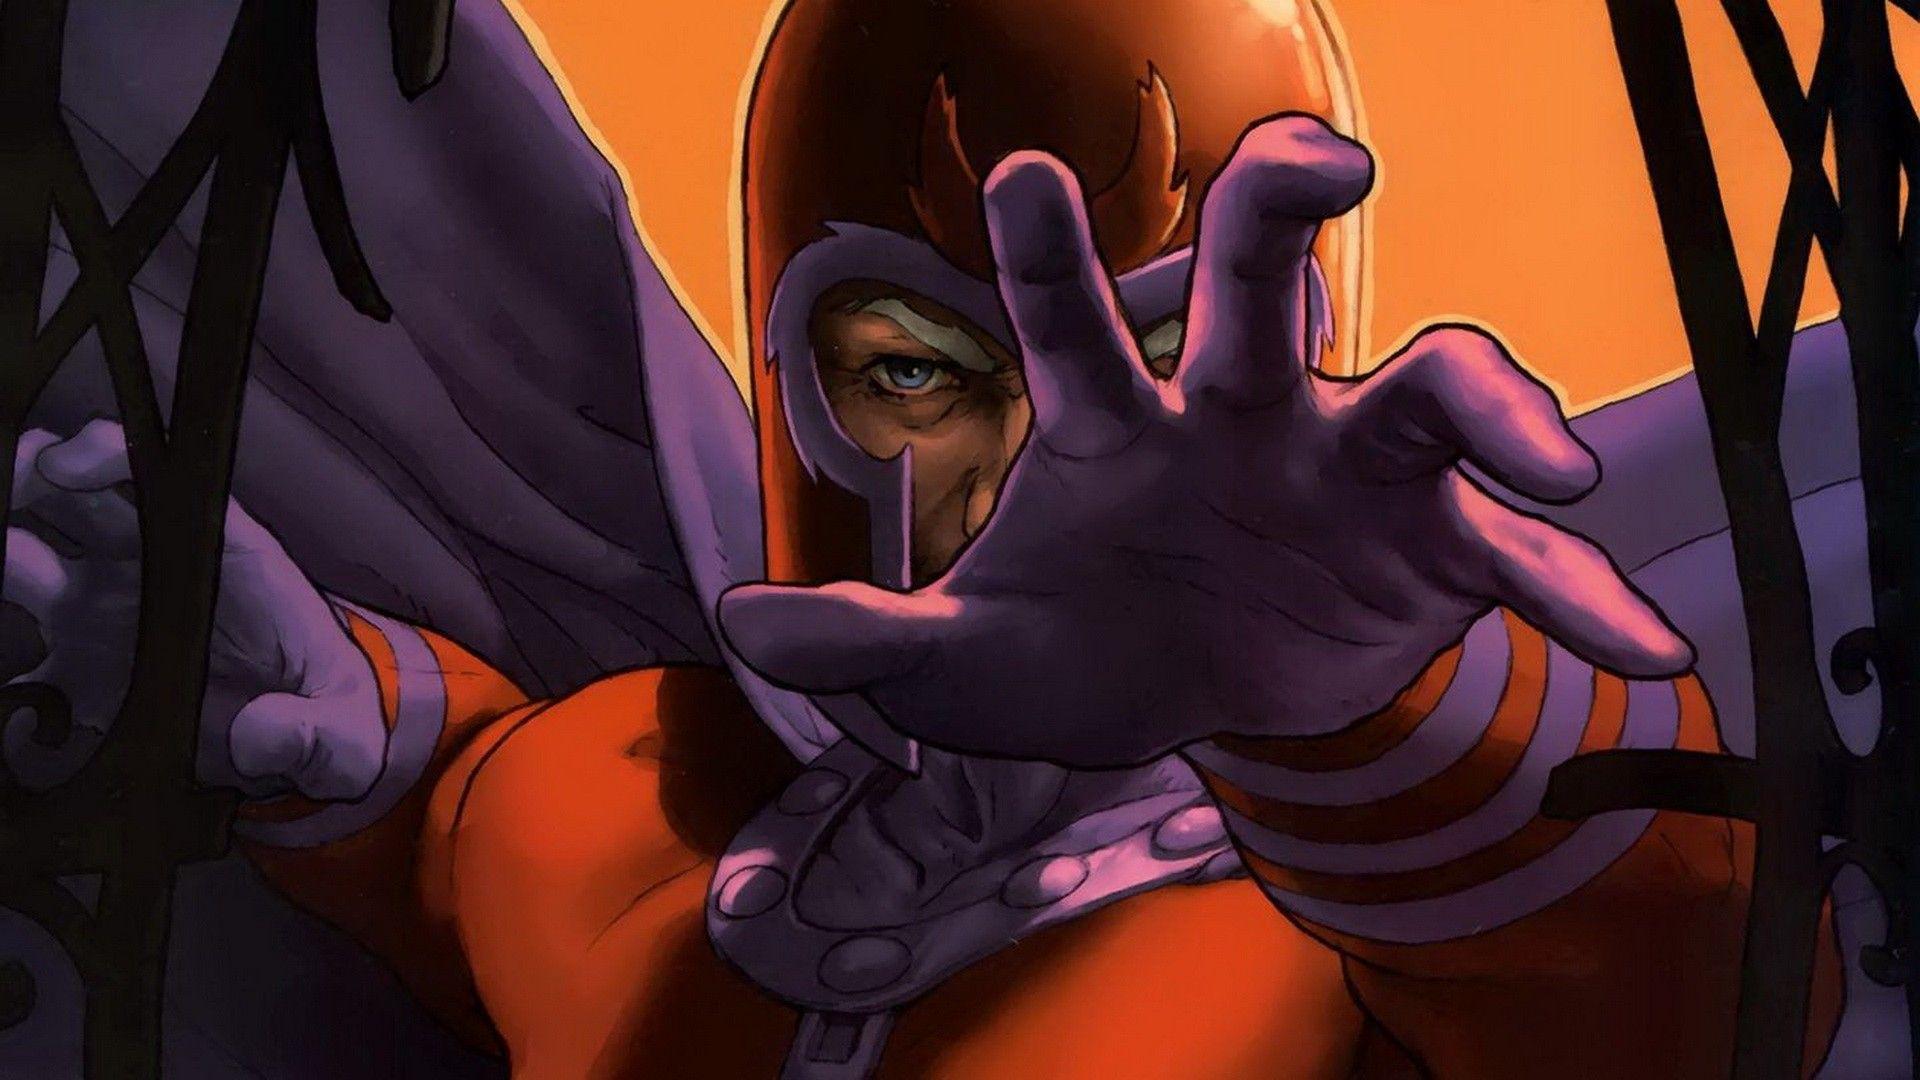 Magneto Wallpaper With Hand Of Lifting Amd Move Power Wallpaper